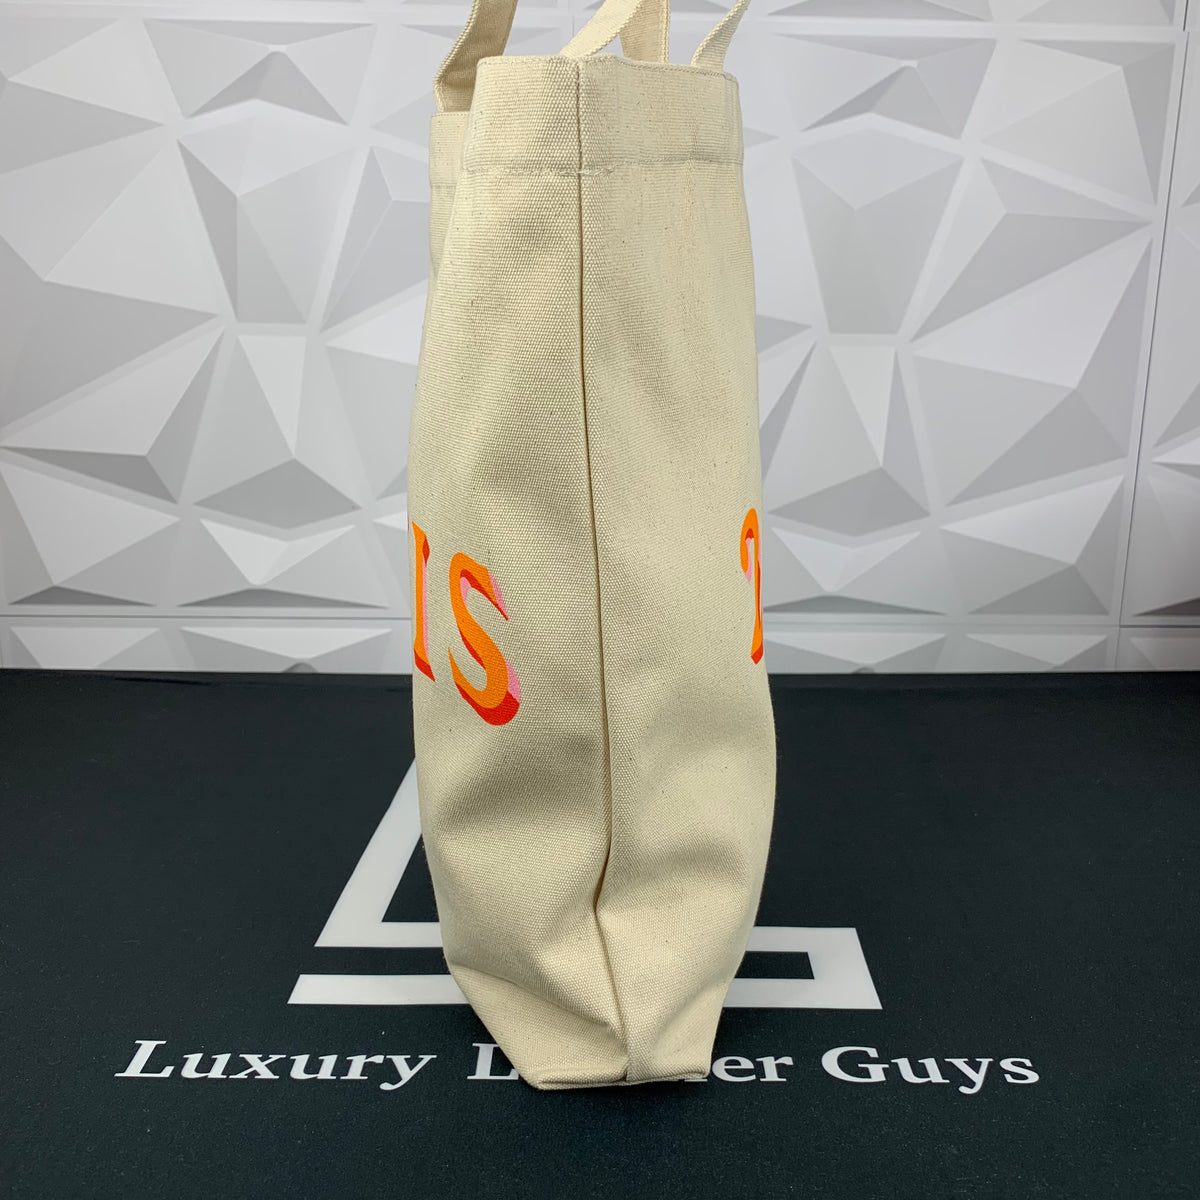 Louis Vuitton 200th Anniversary Trunks Exhibition Exclusive Canvas Tote Bag  NEW